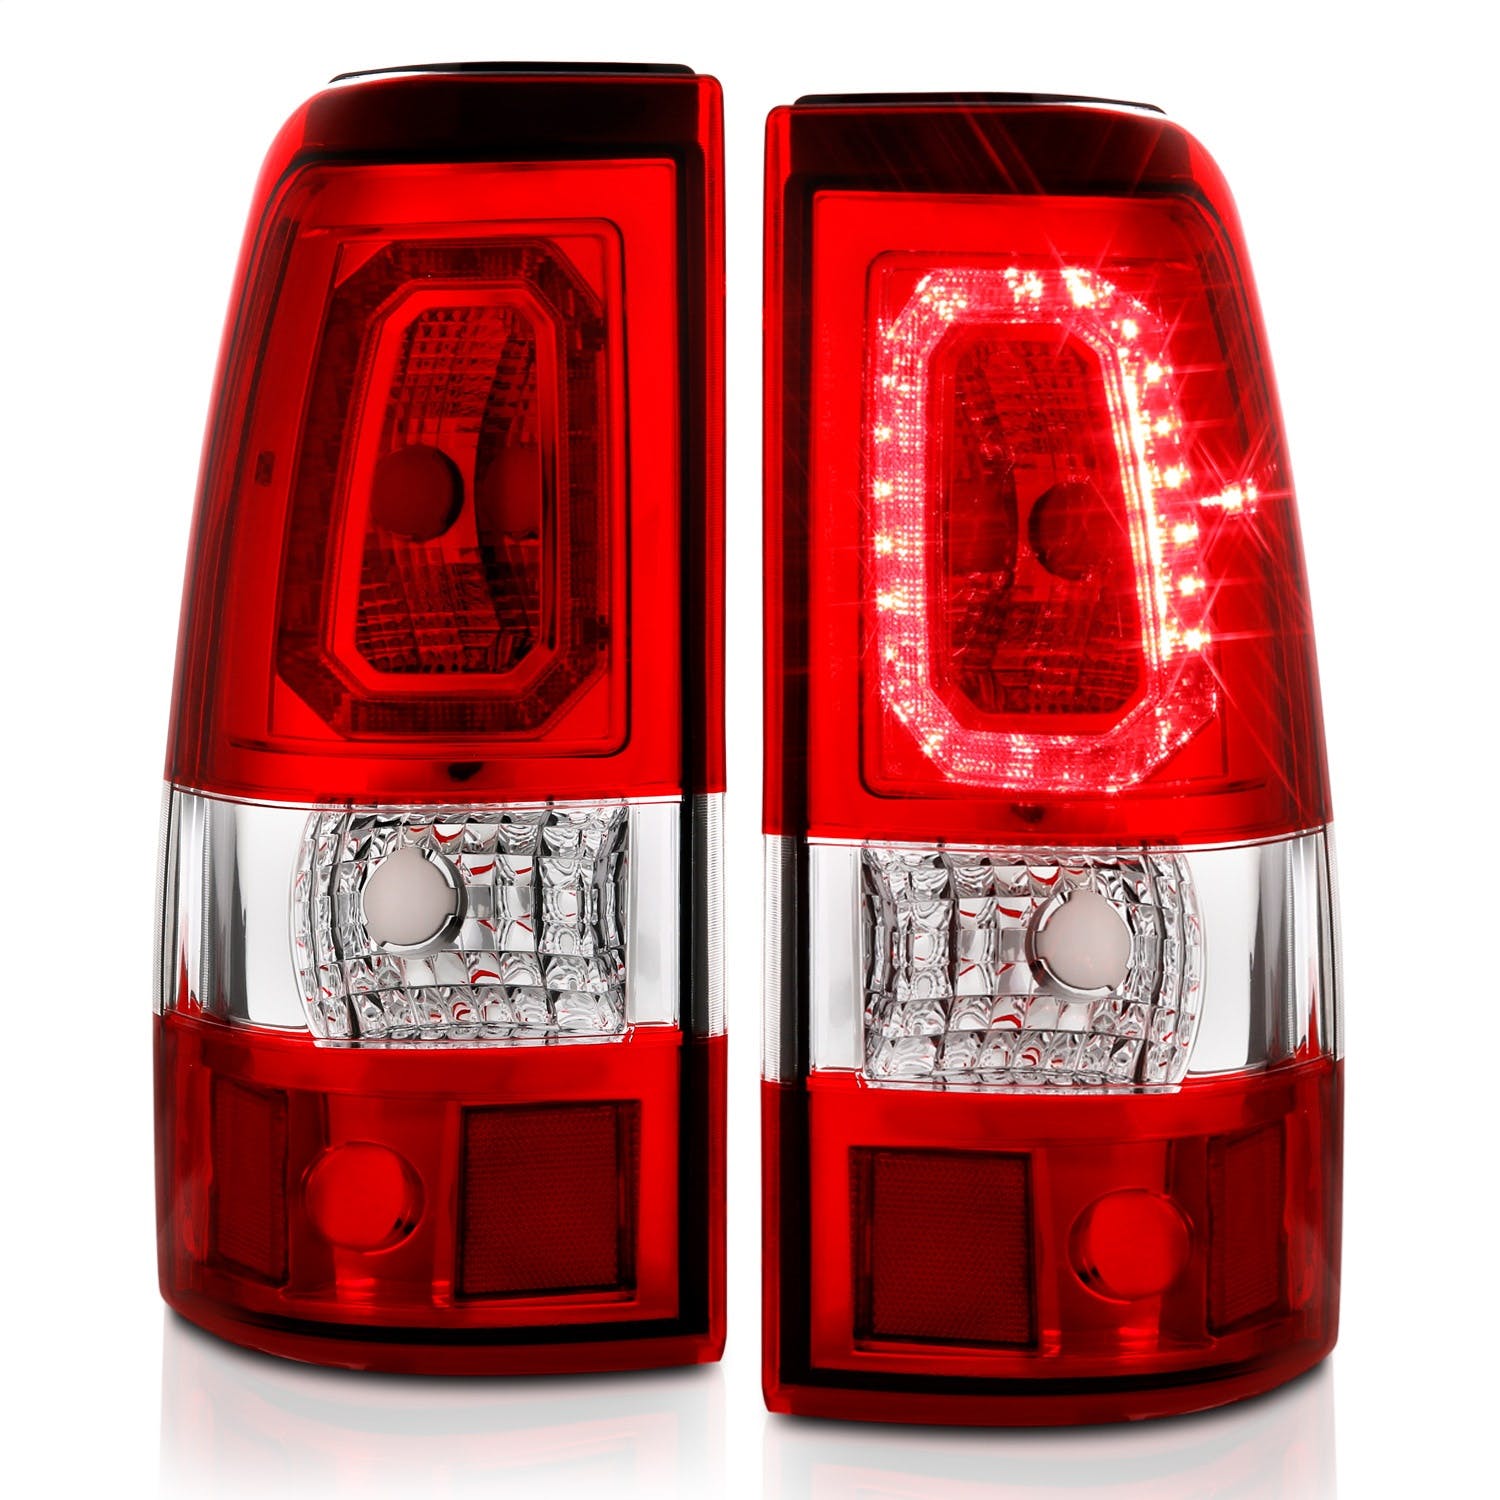 AnzoUSA 311329 LED Taillights Plank Style Chrome with Red/Clear Lens